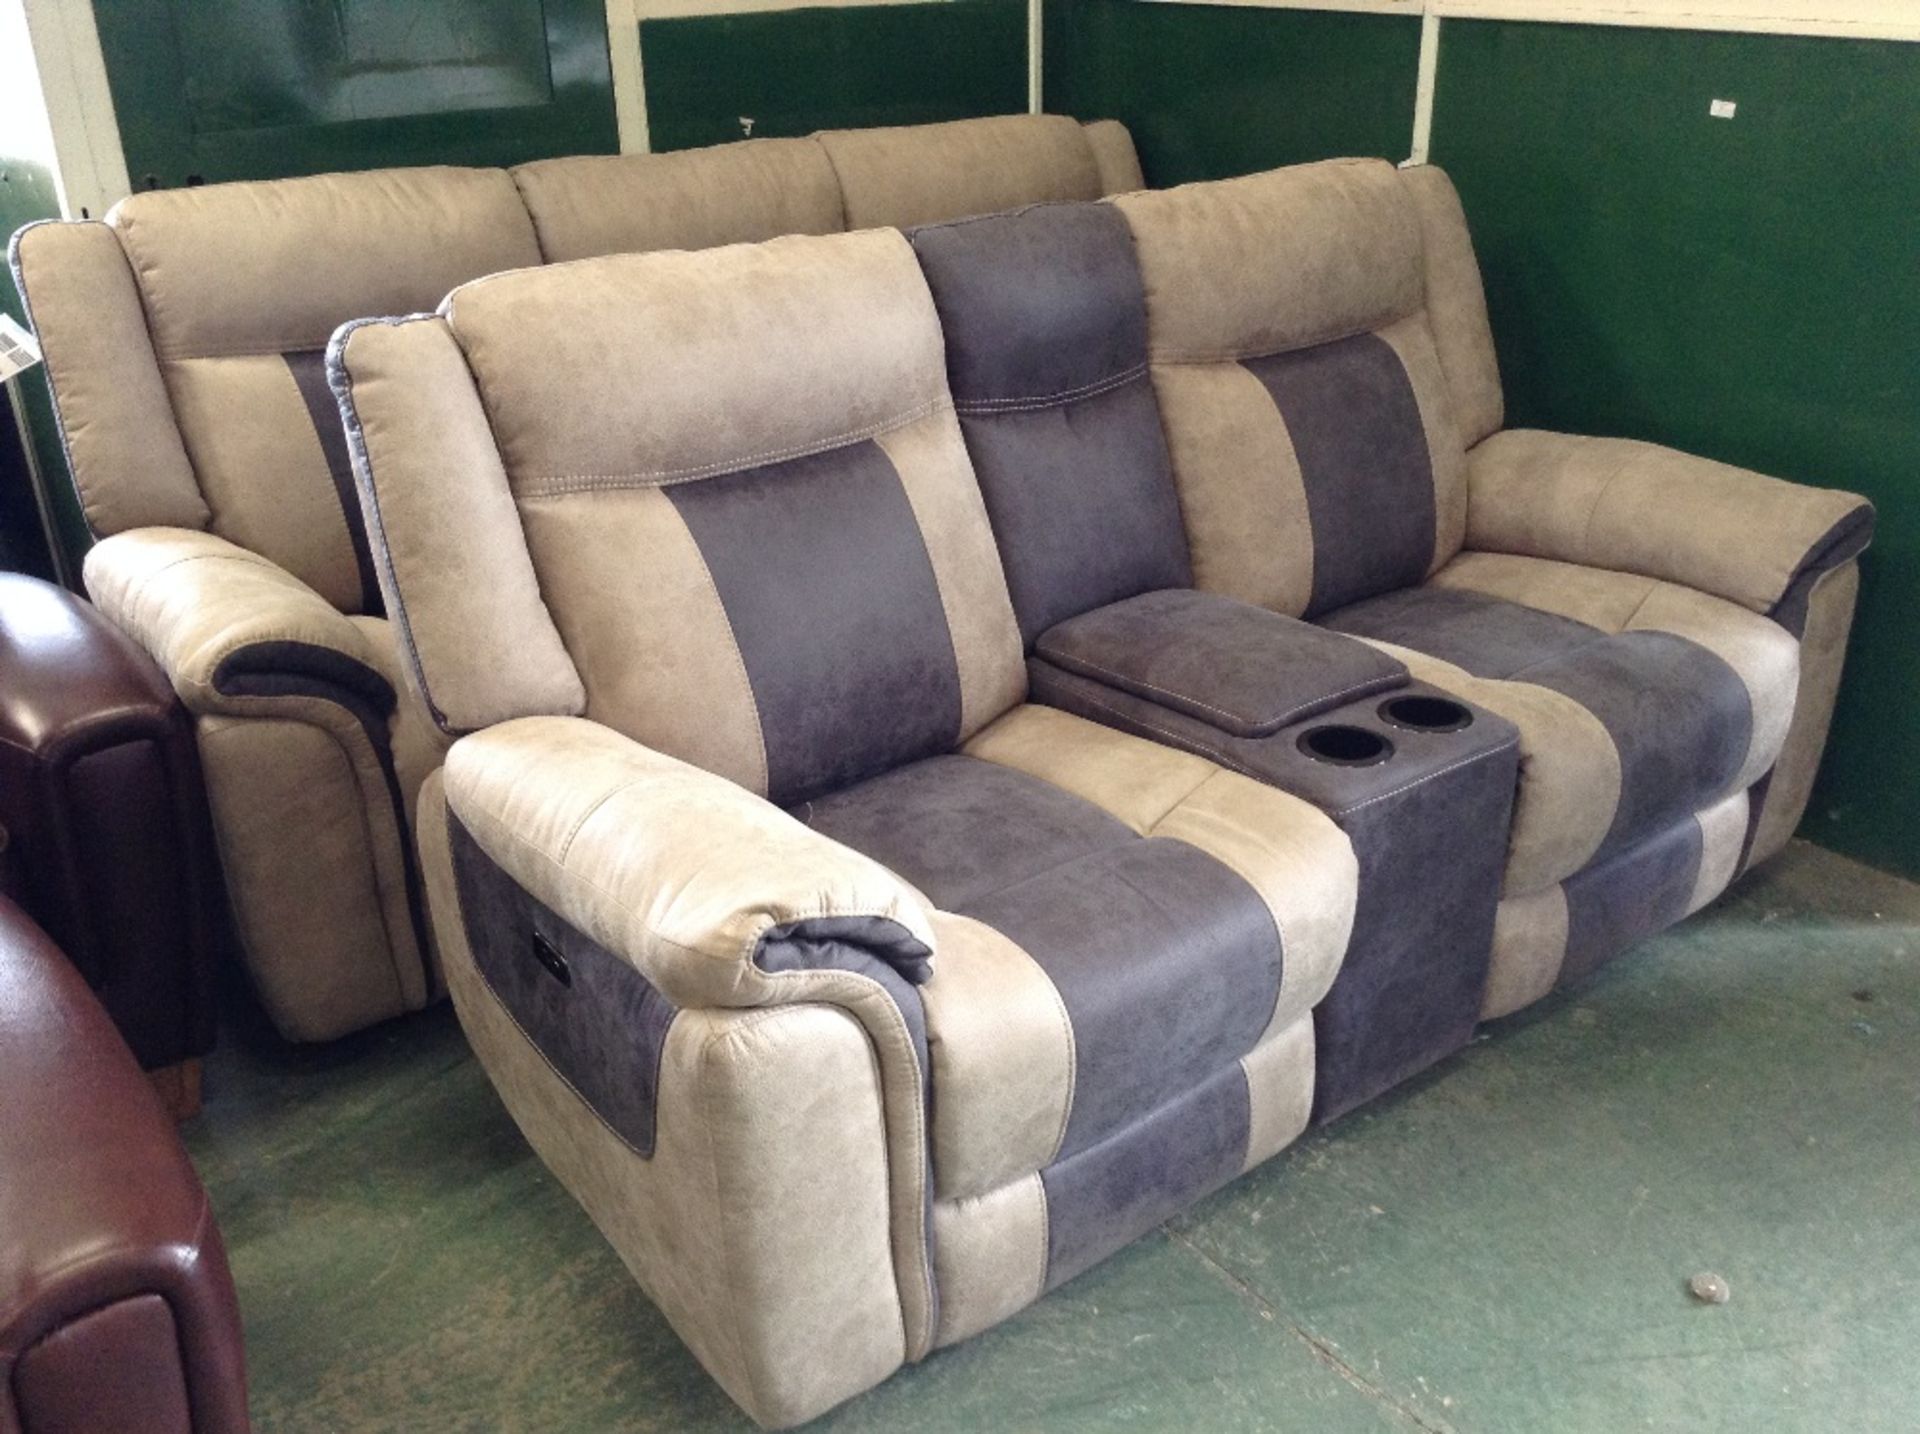 BEIGE AND GREY SADDLE ELECTRIC RECLINING 3 SEATER